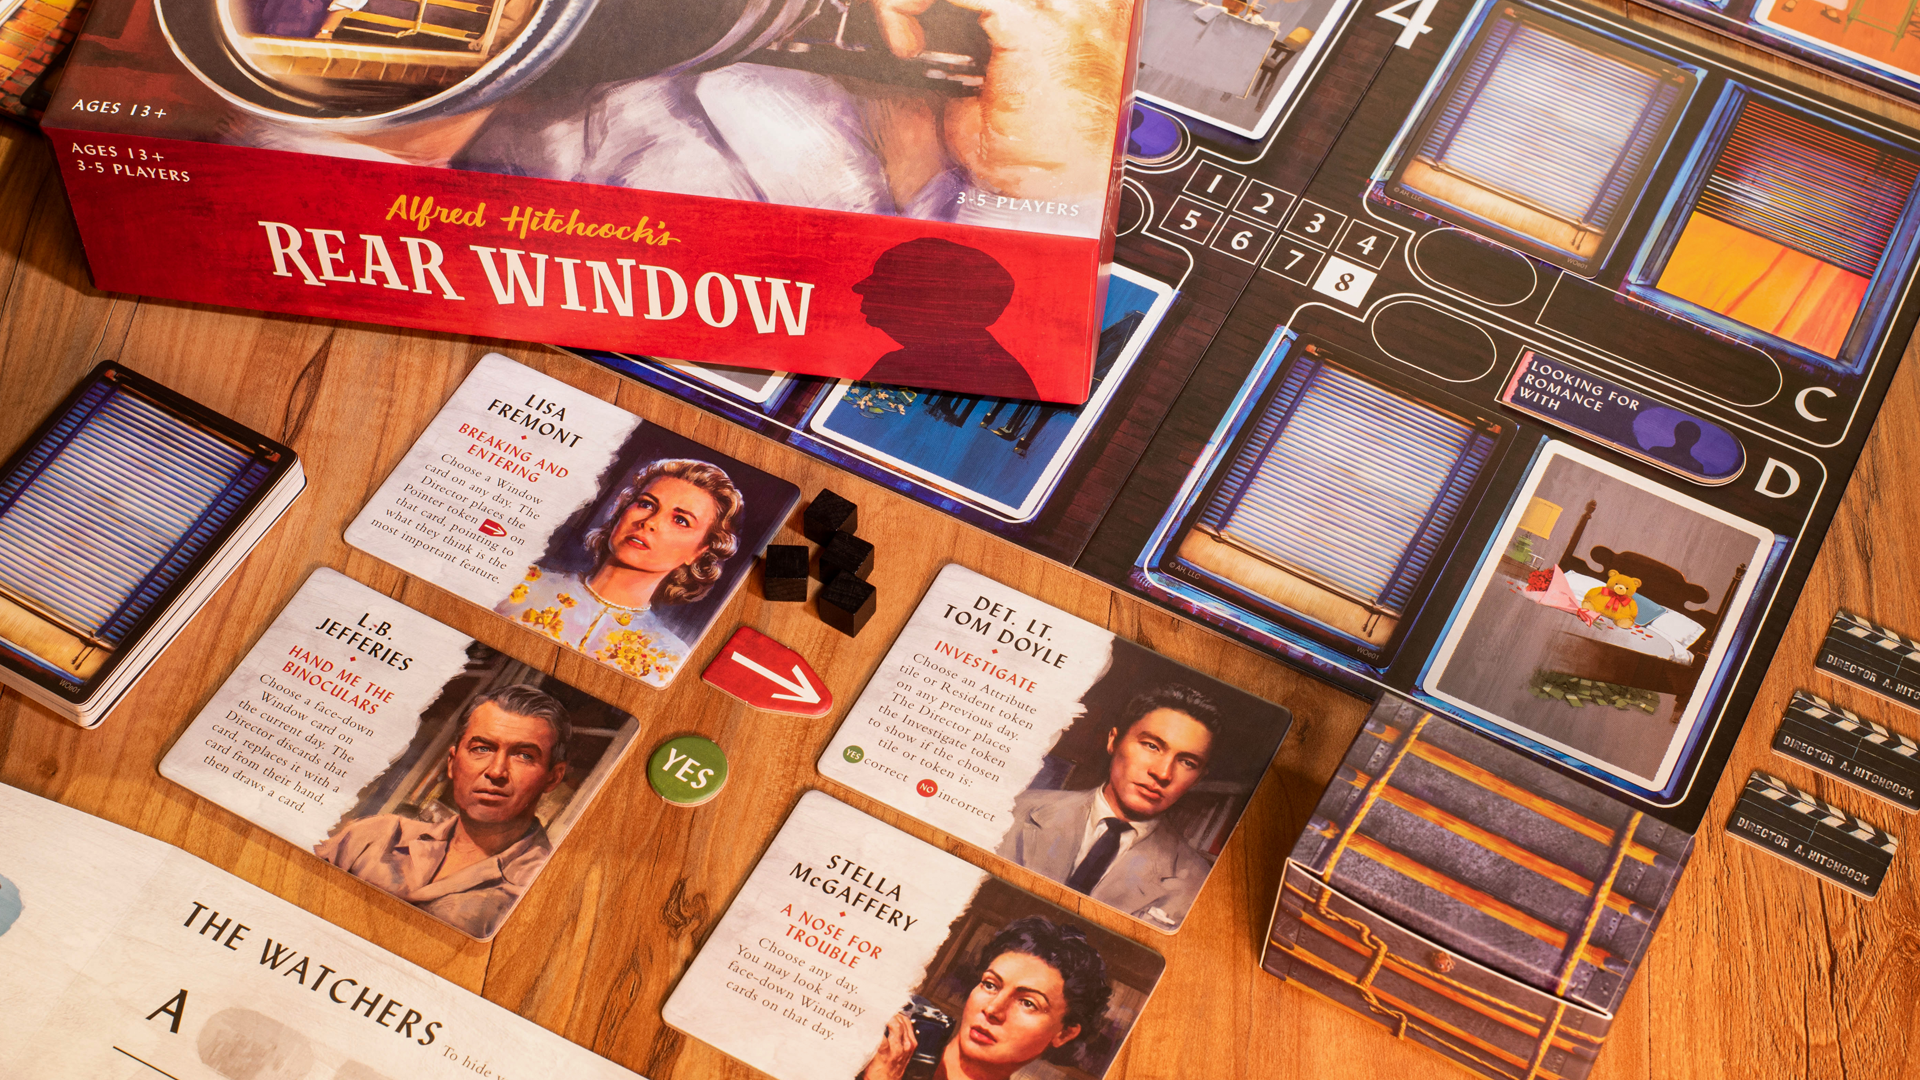 A layout image for the Rear Window board game.